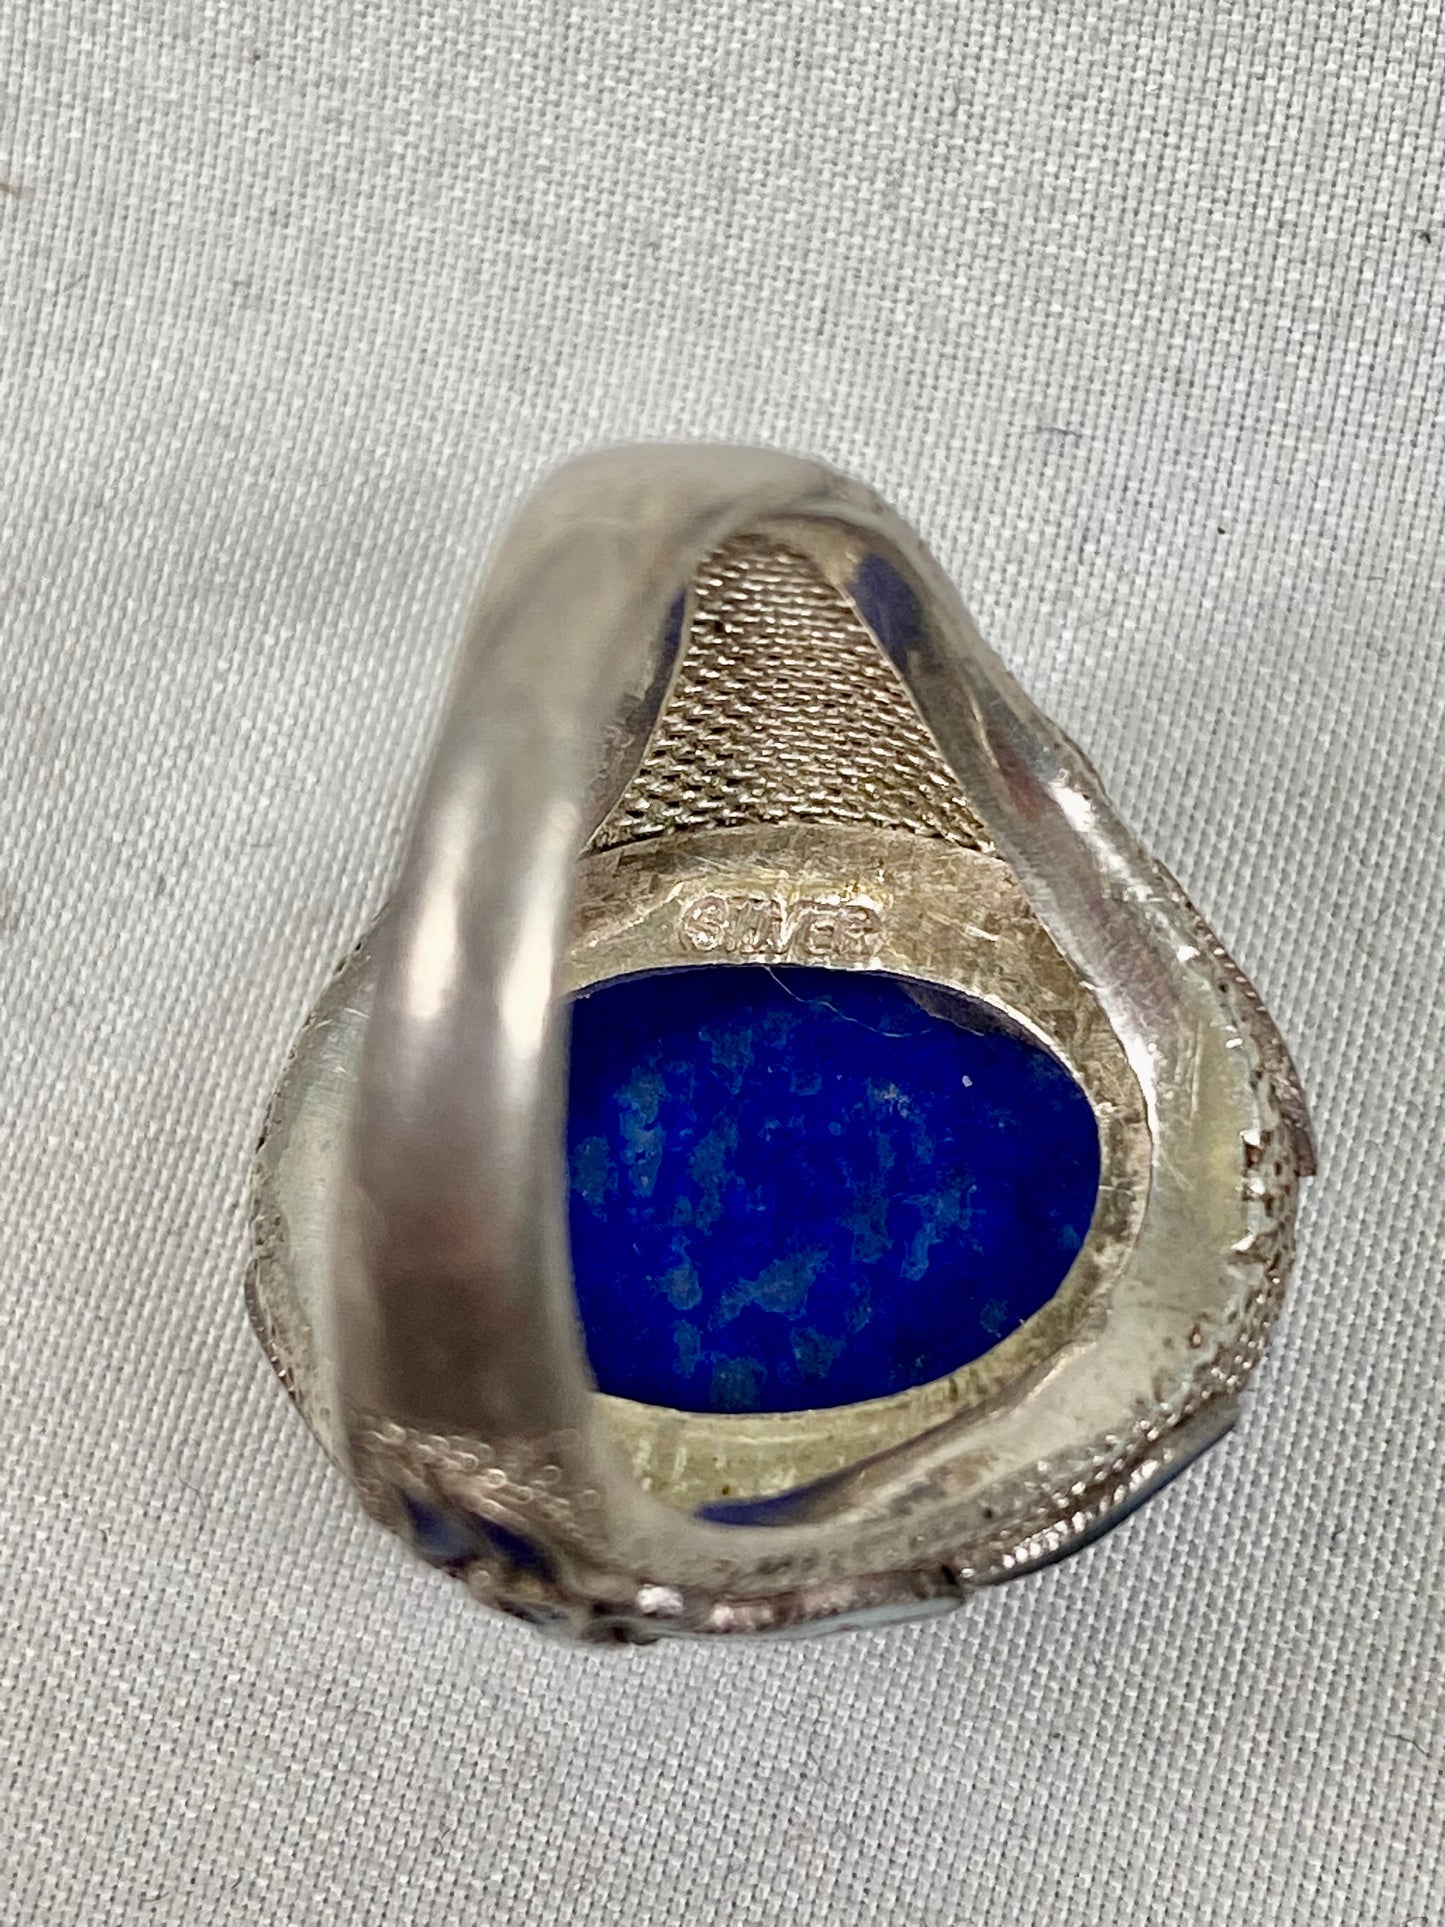 Vintage Near Antique Chinese Export Silver Filigree and Enamel Blue Stone Ring.